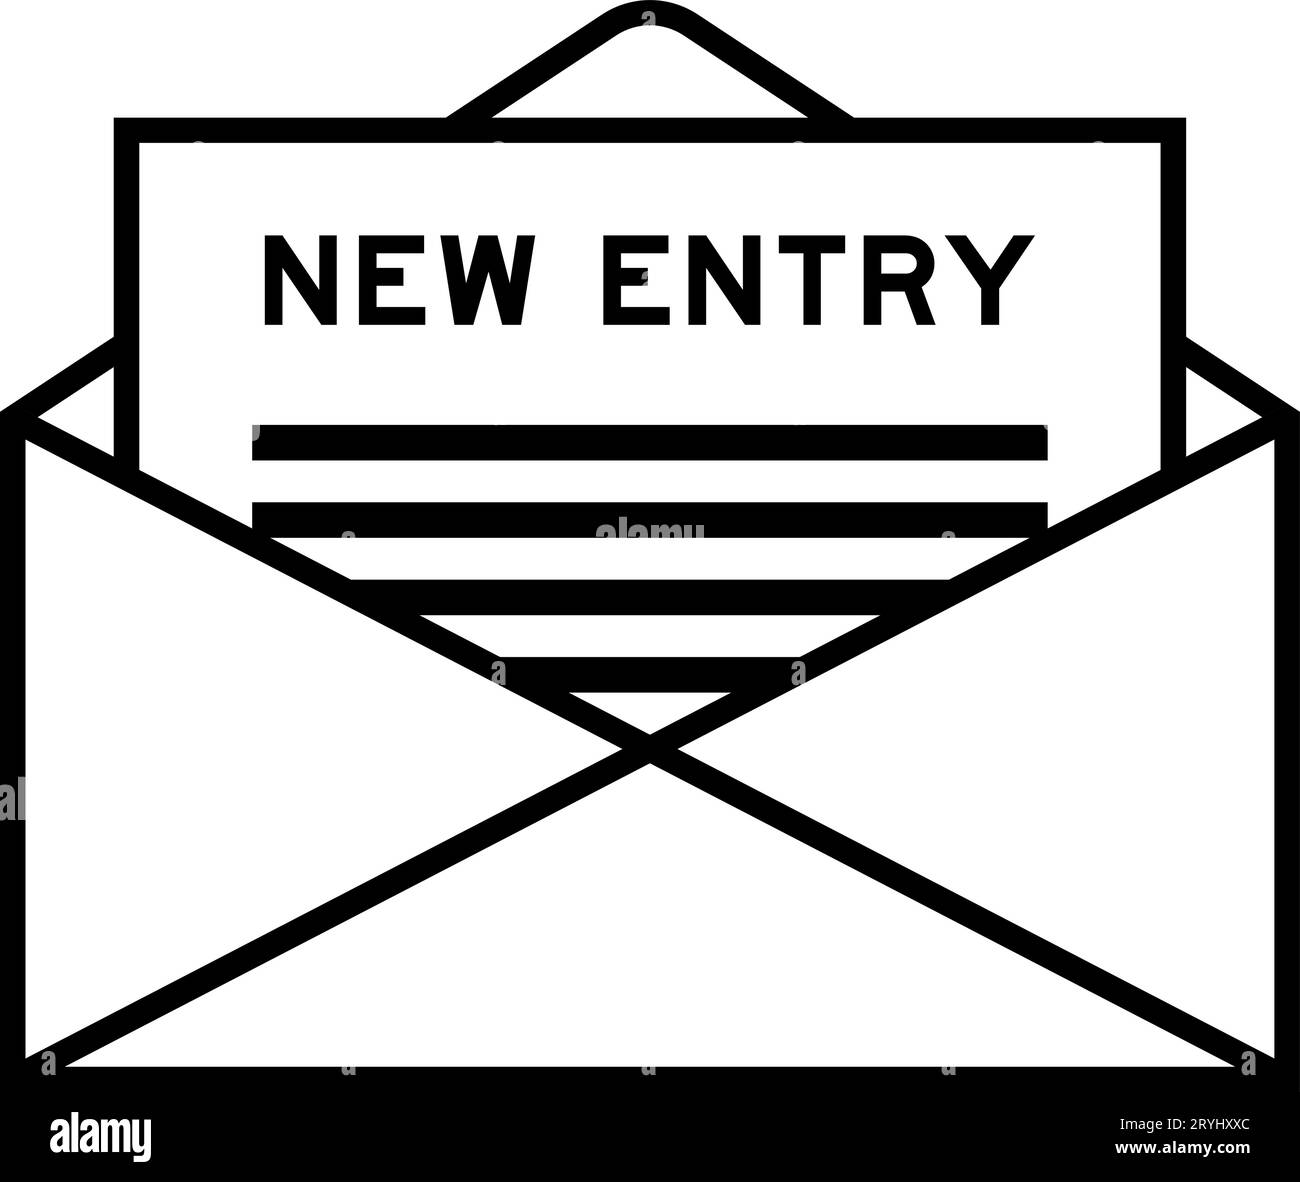 Envelope and letter sign with word new entry as the headline Stock Vector